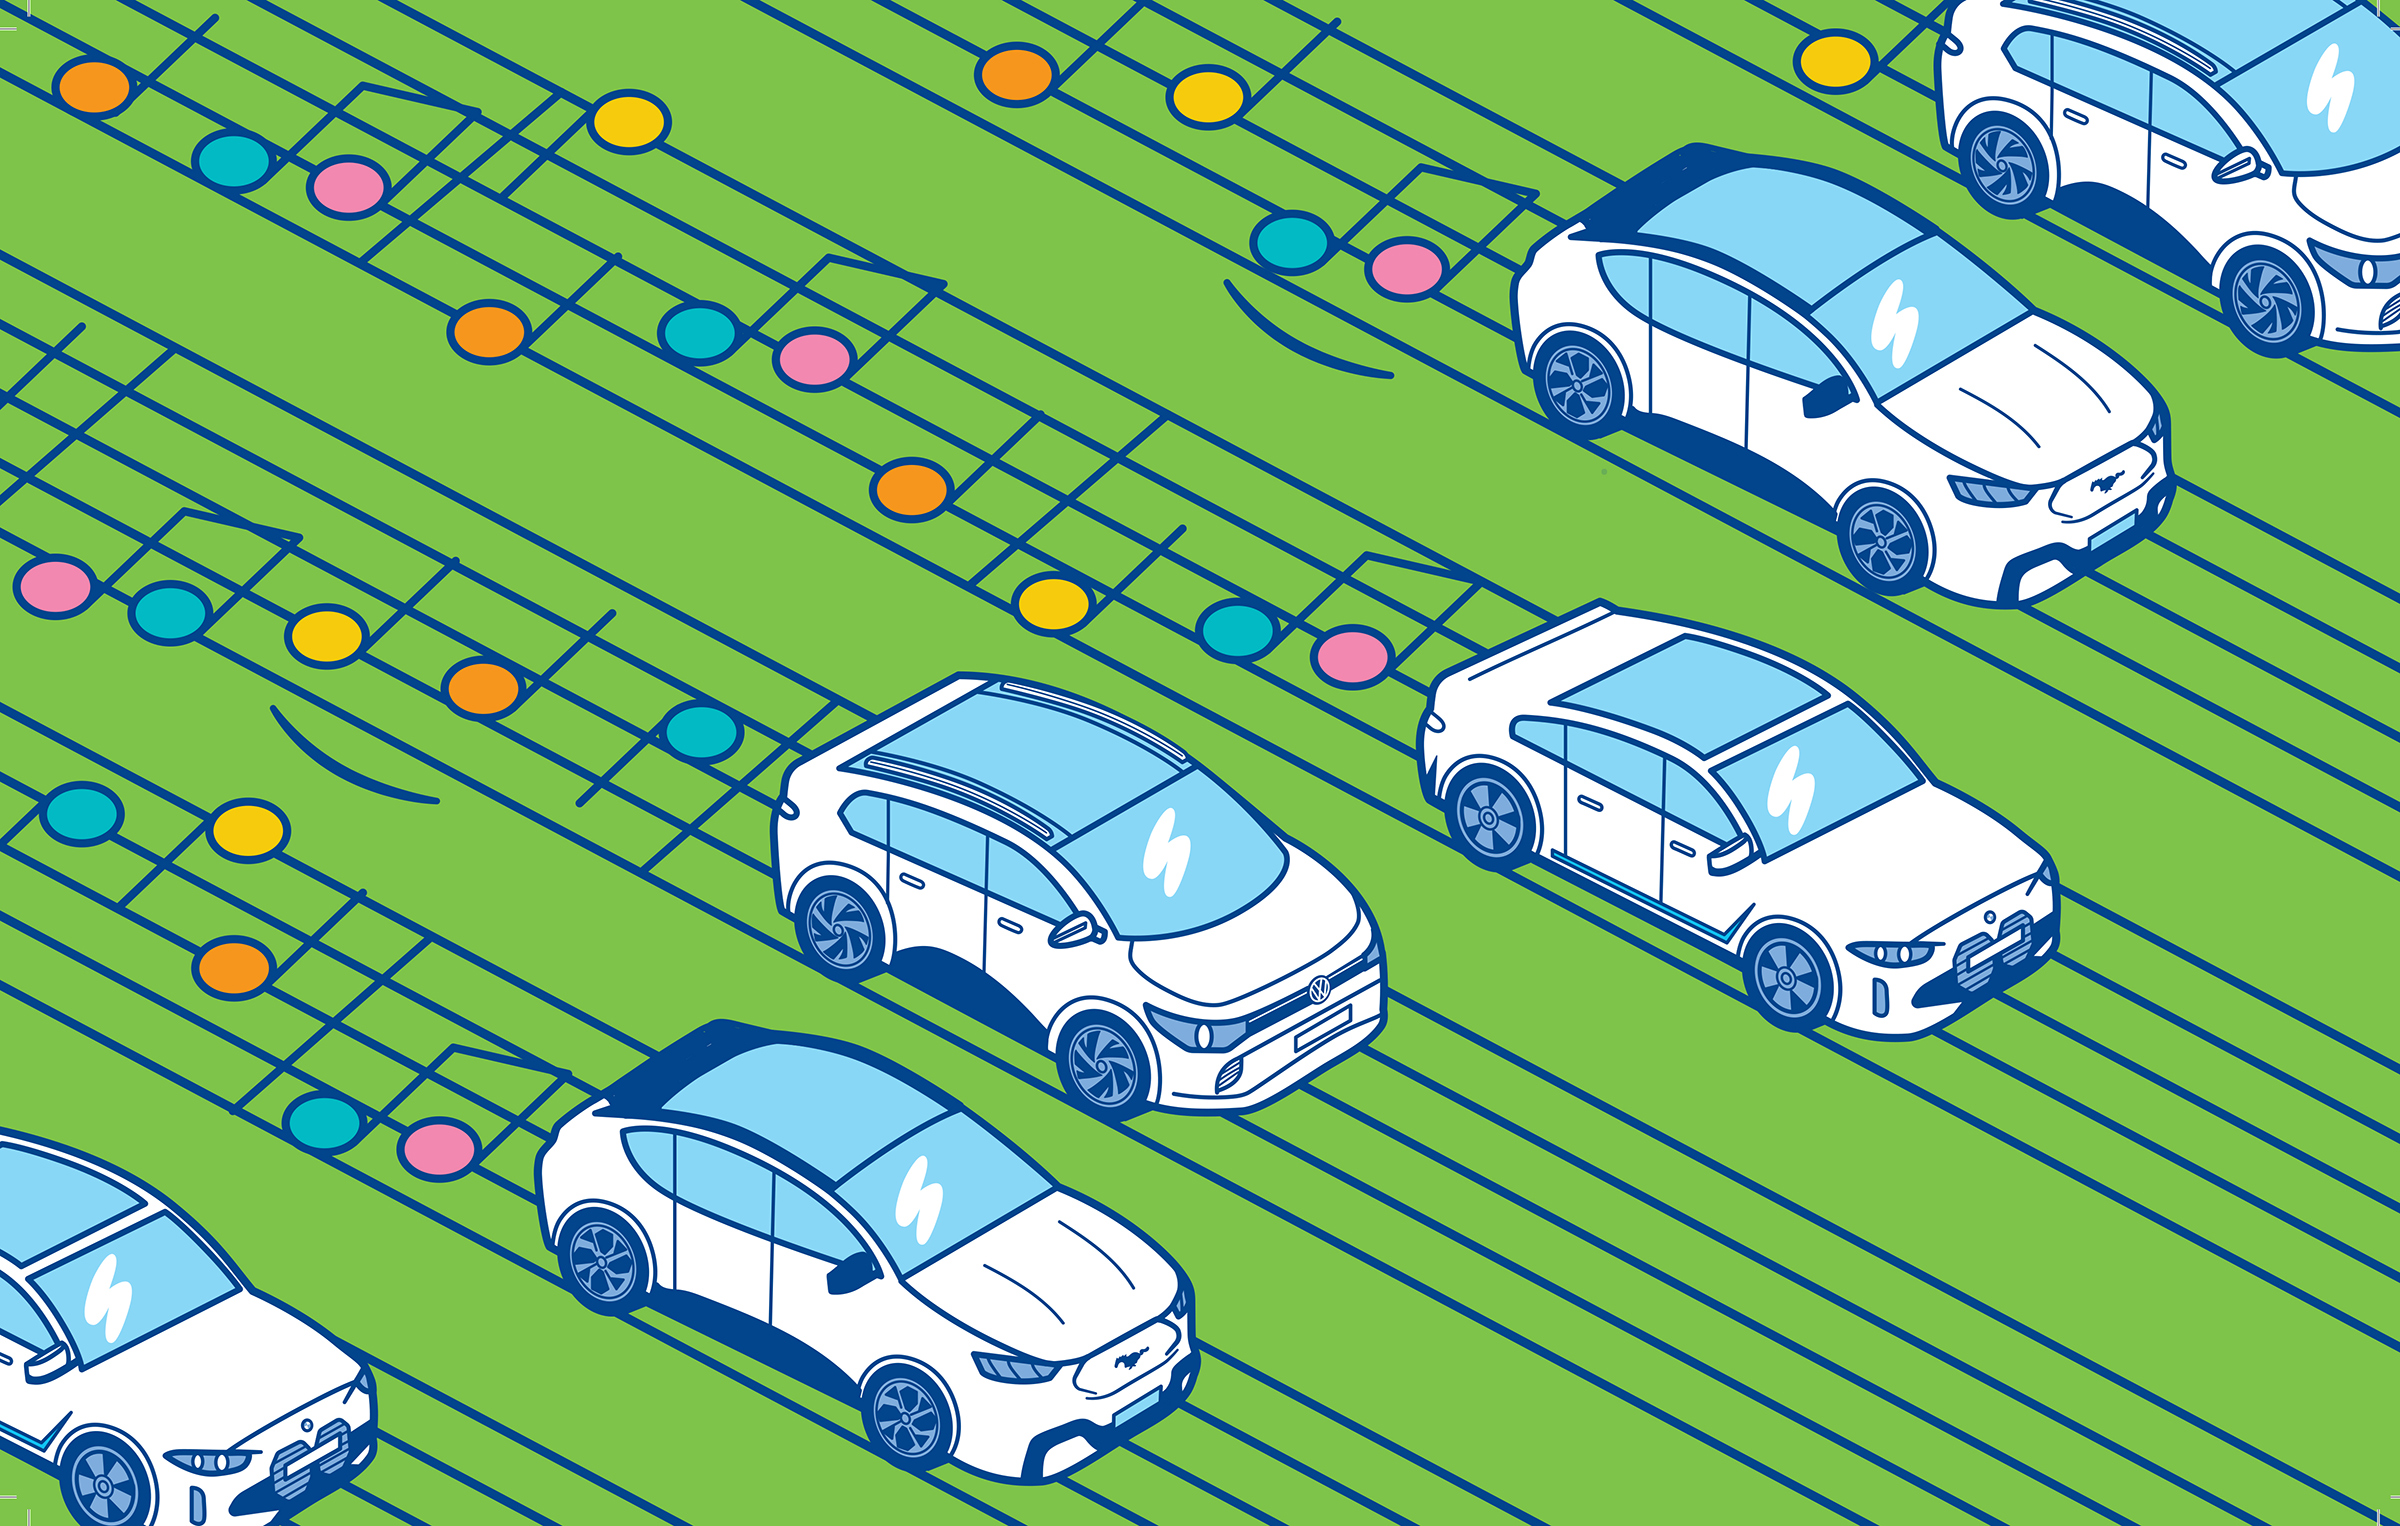 Electric Cars Can Sound Like Anything. That’s a Huge Opportunity to Craft the Soundscape of the Future